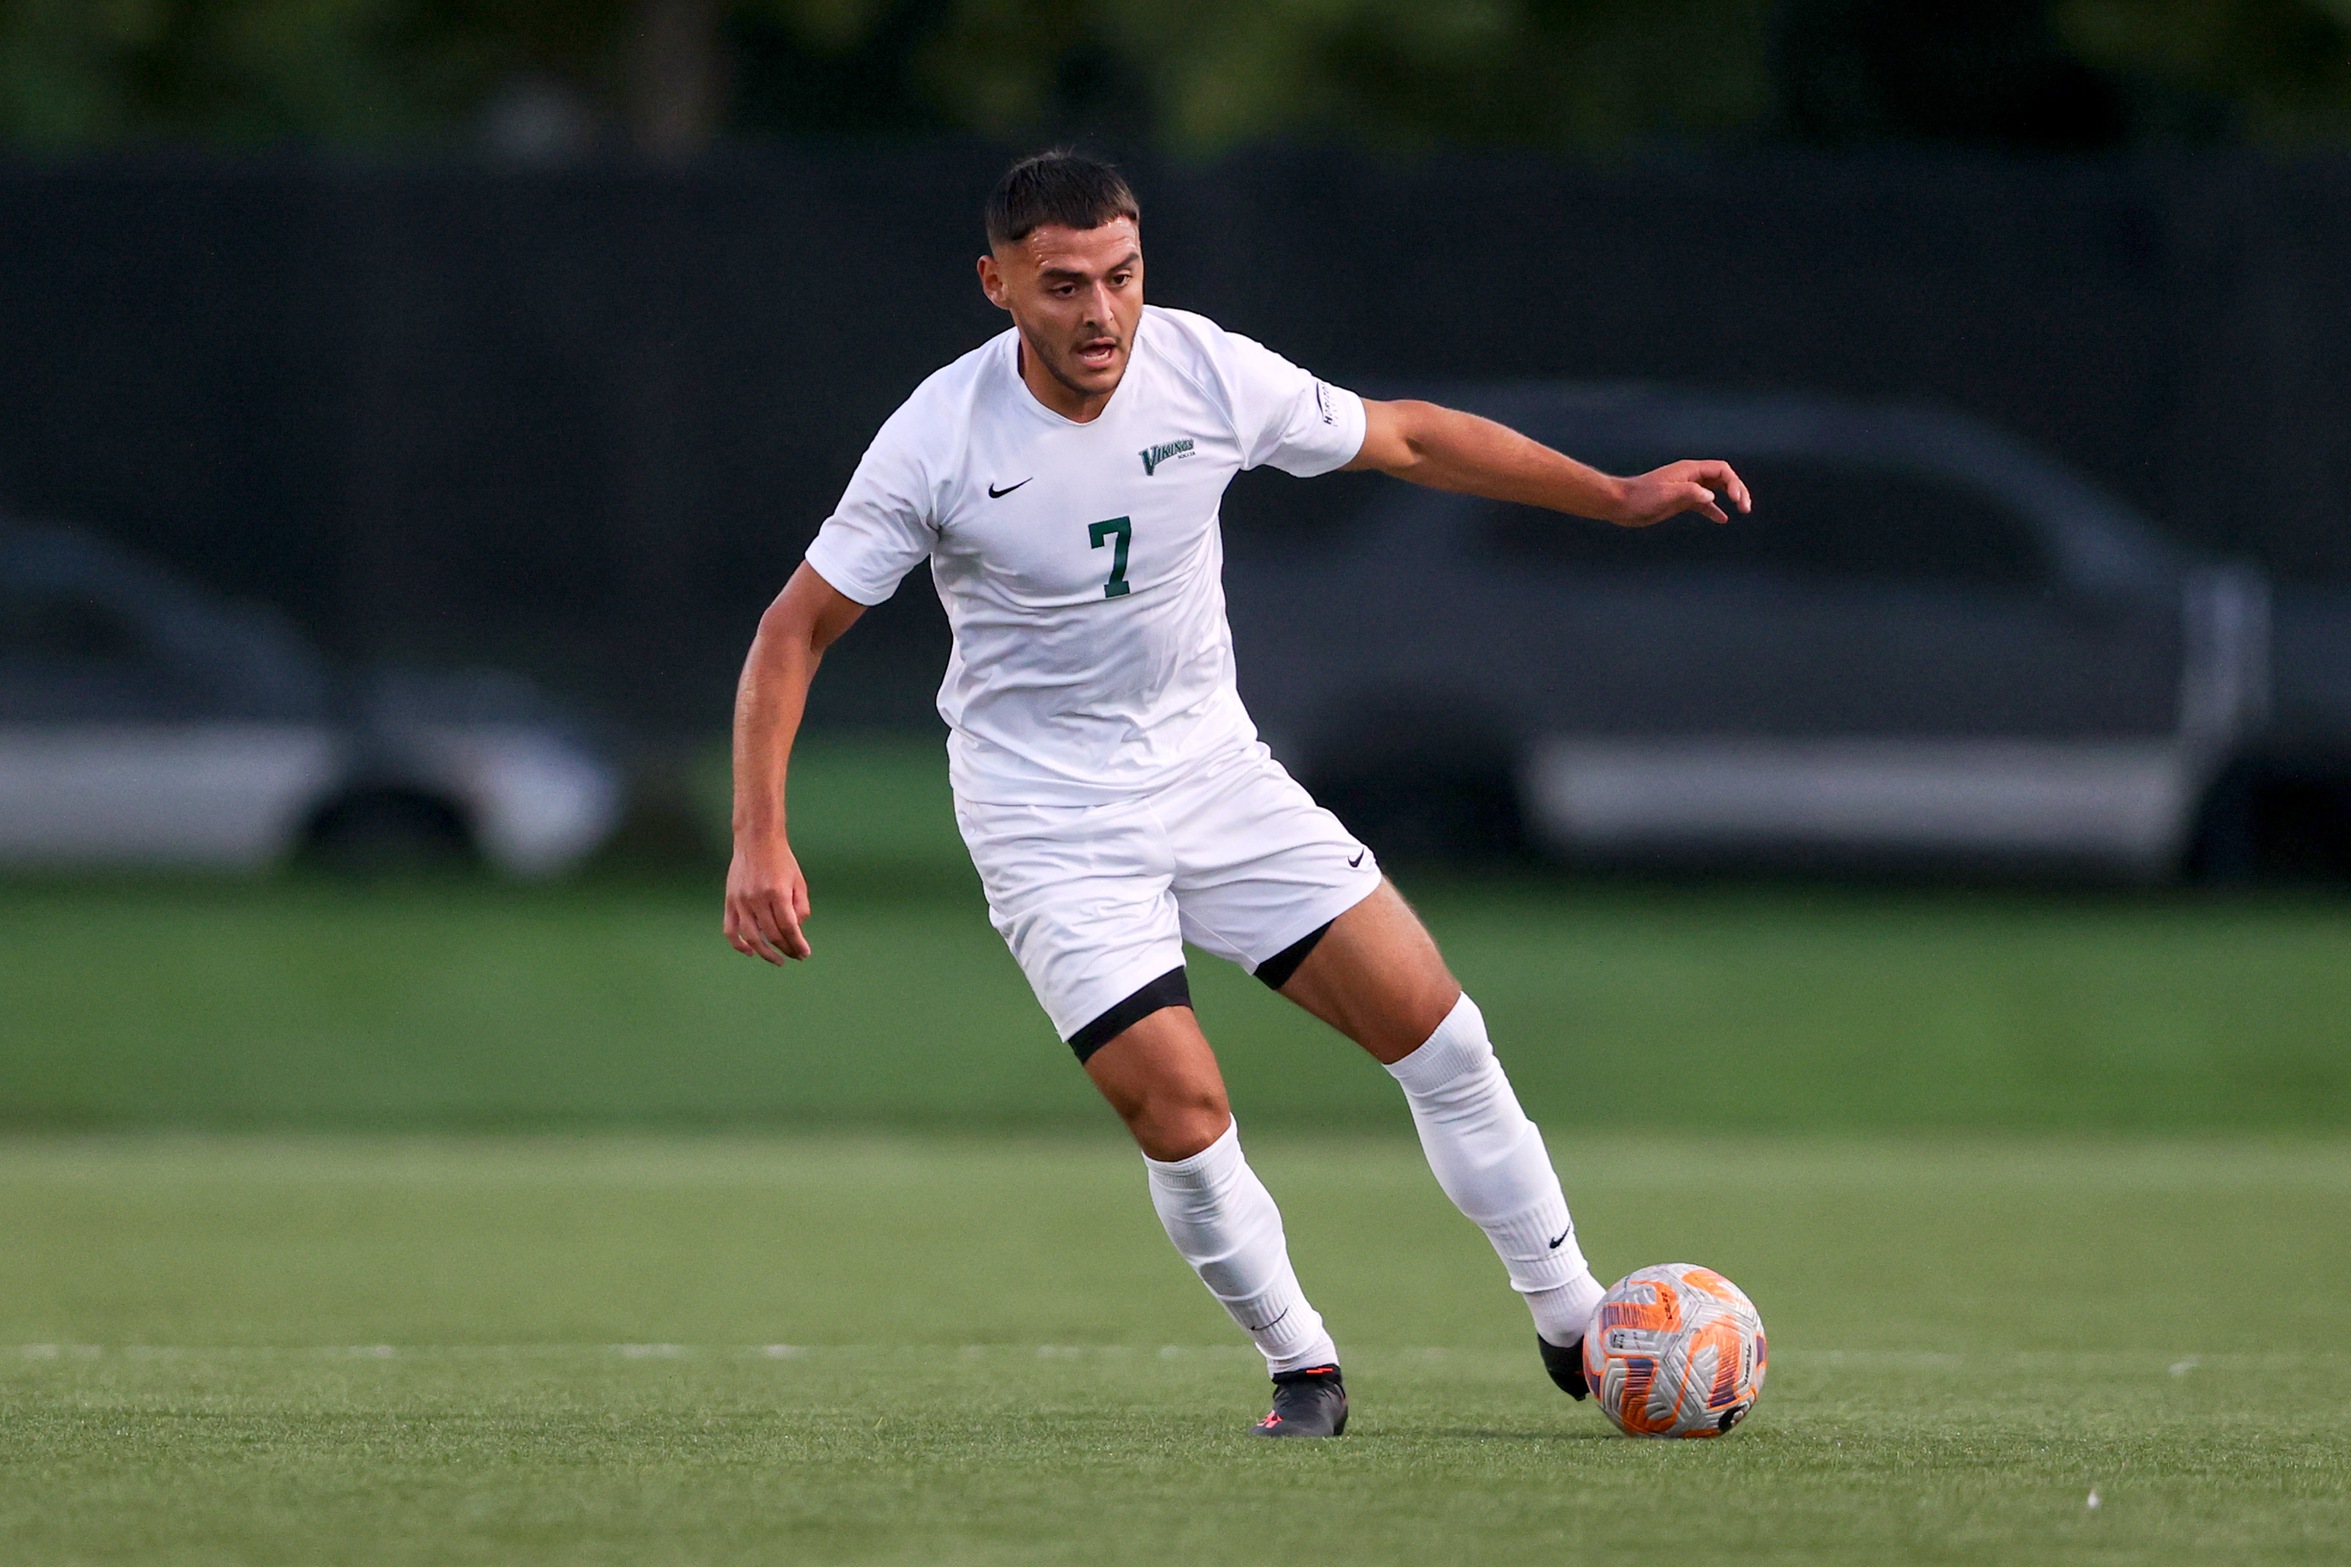 Cleveland State Men's Soccer Looks to Bounce Back at St. Bonaventure